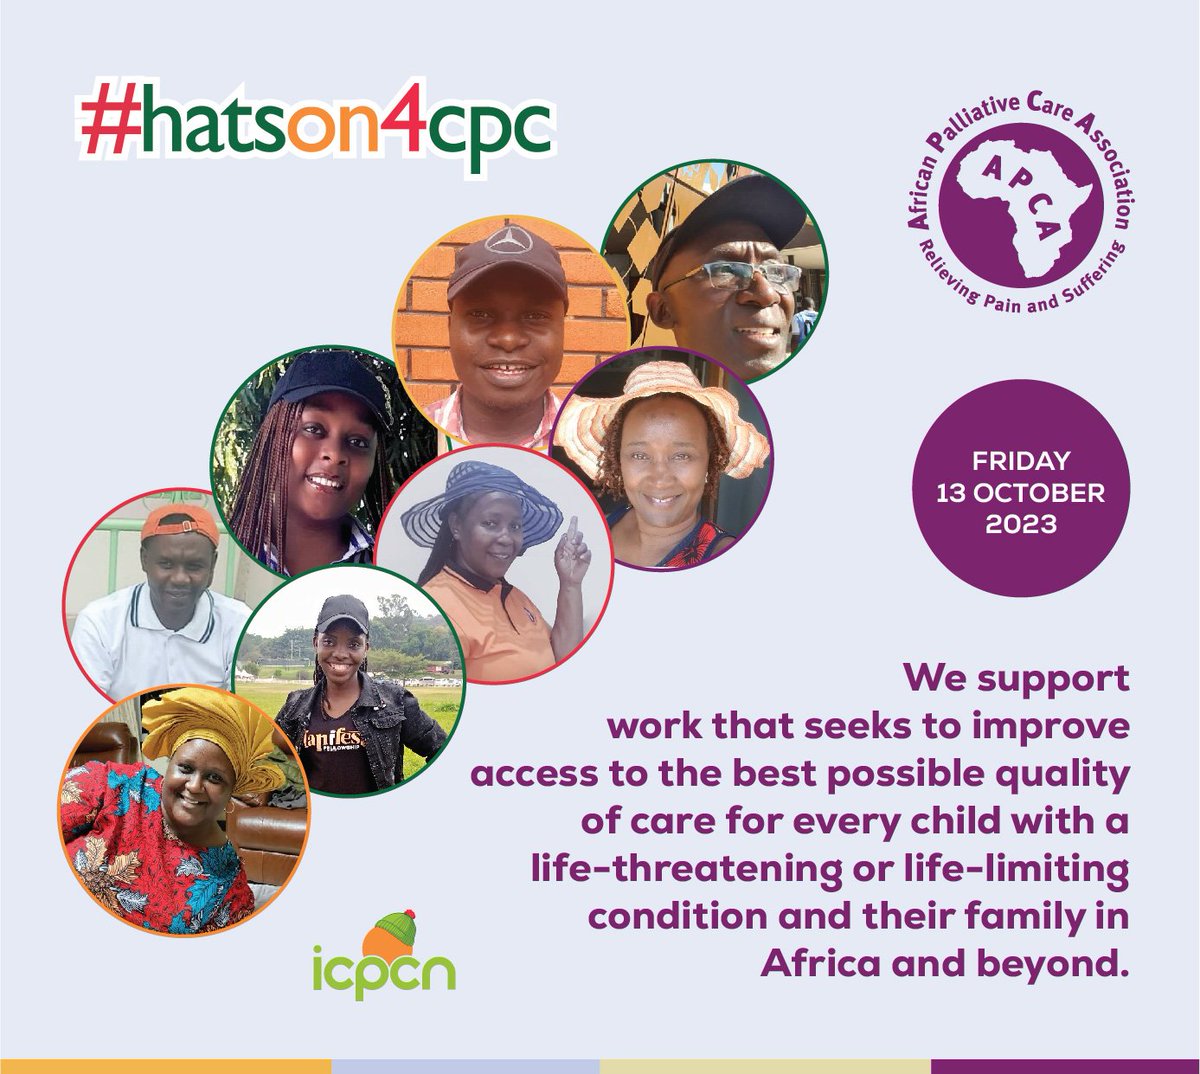 The @APCAssociation staff, board, members and partners stand with the #HatsOn4CPC campaign; working to bring an end to health related pain & suffering in Africa. #ChildrensPalliativeCare in #Africa #UHC @UHC_Day @DrLuyirika @EveNamisango @PatBatanda @DavidKagoroB @DianahHossana